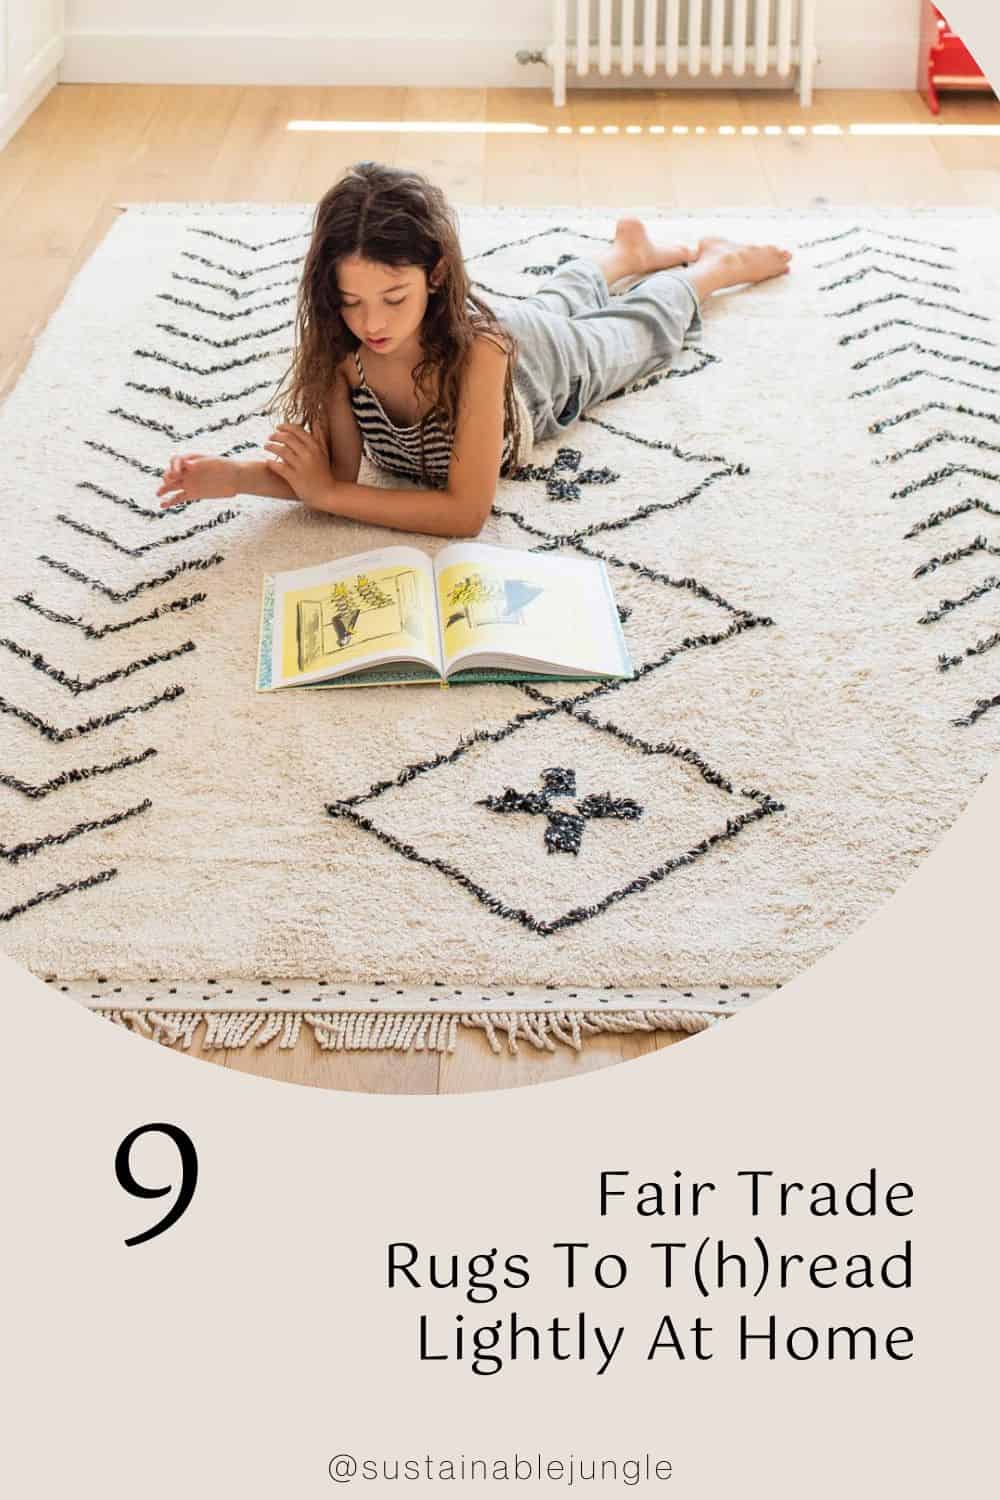 9 Fair Trade Rugs To T(h)read Lightly At Home Image by Lorena Canals #fairtraderugs #fairtradearearug #fairtradewoolrugs #ethicalrugs #eticalhandwovenrugs #ethicalarearugs #sustainablejungle